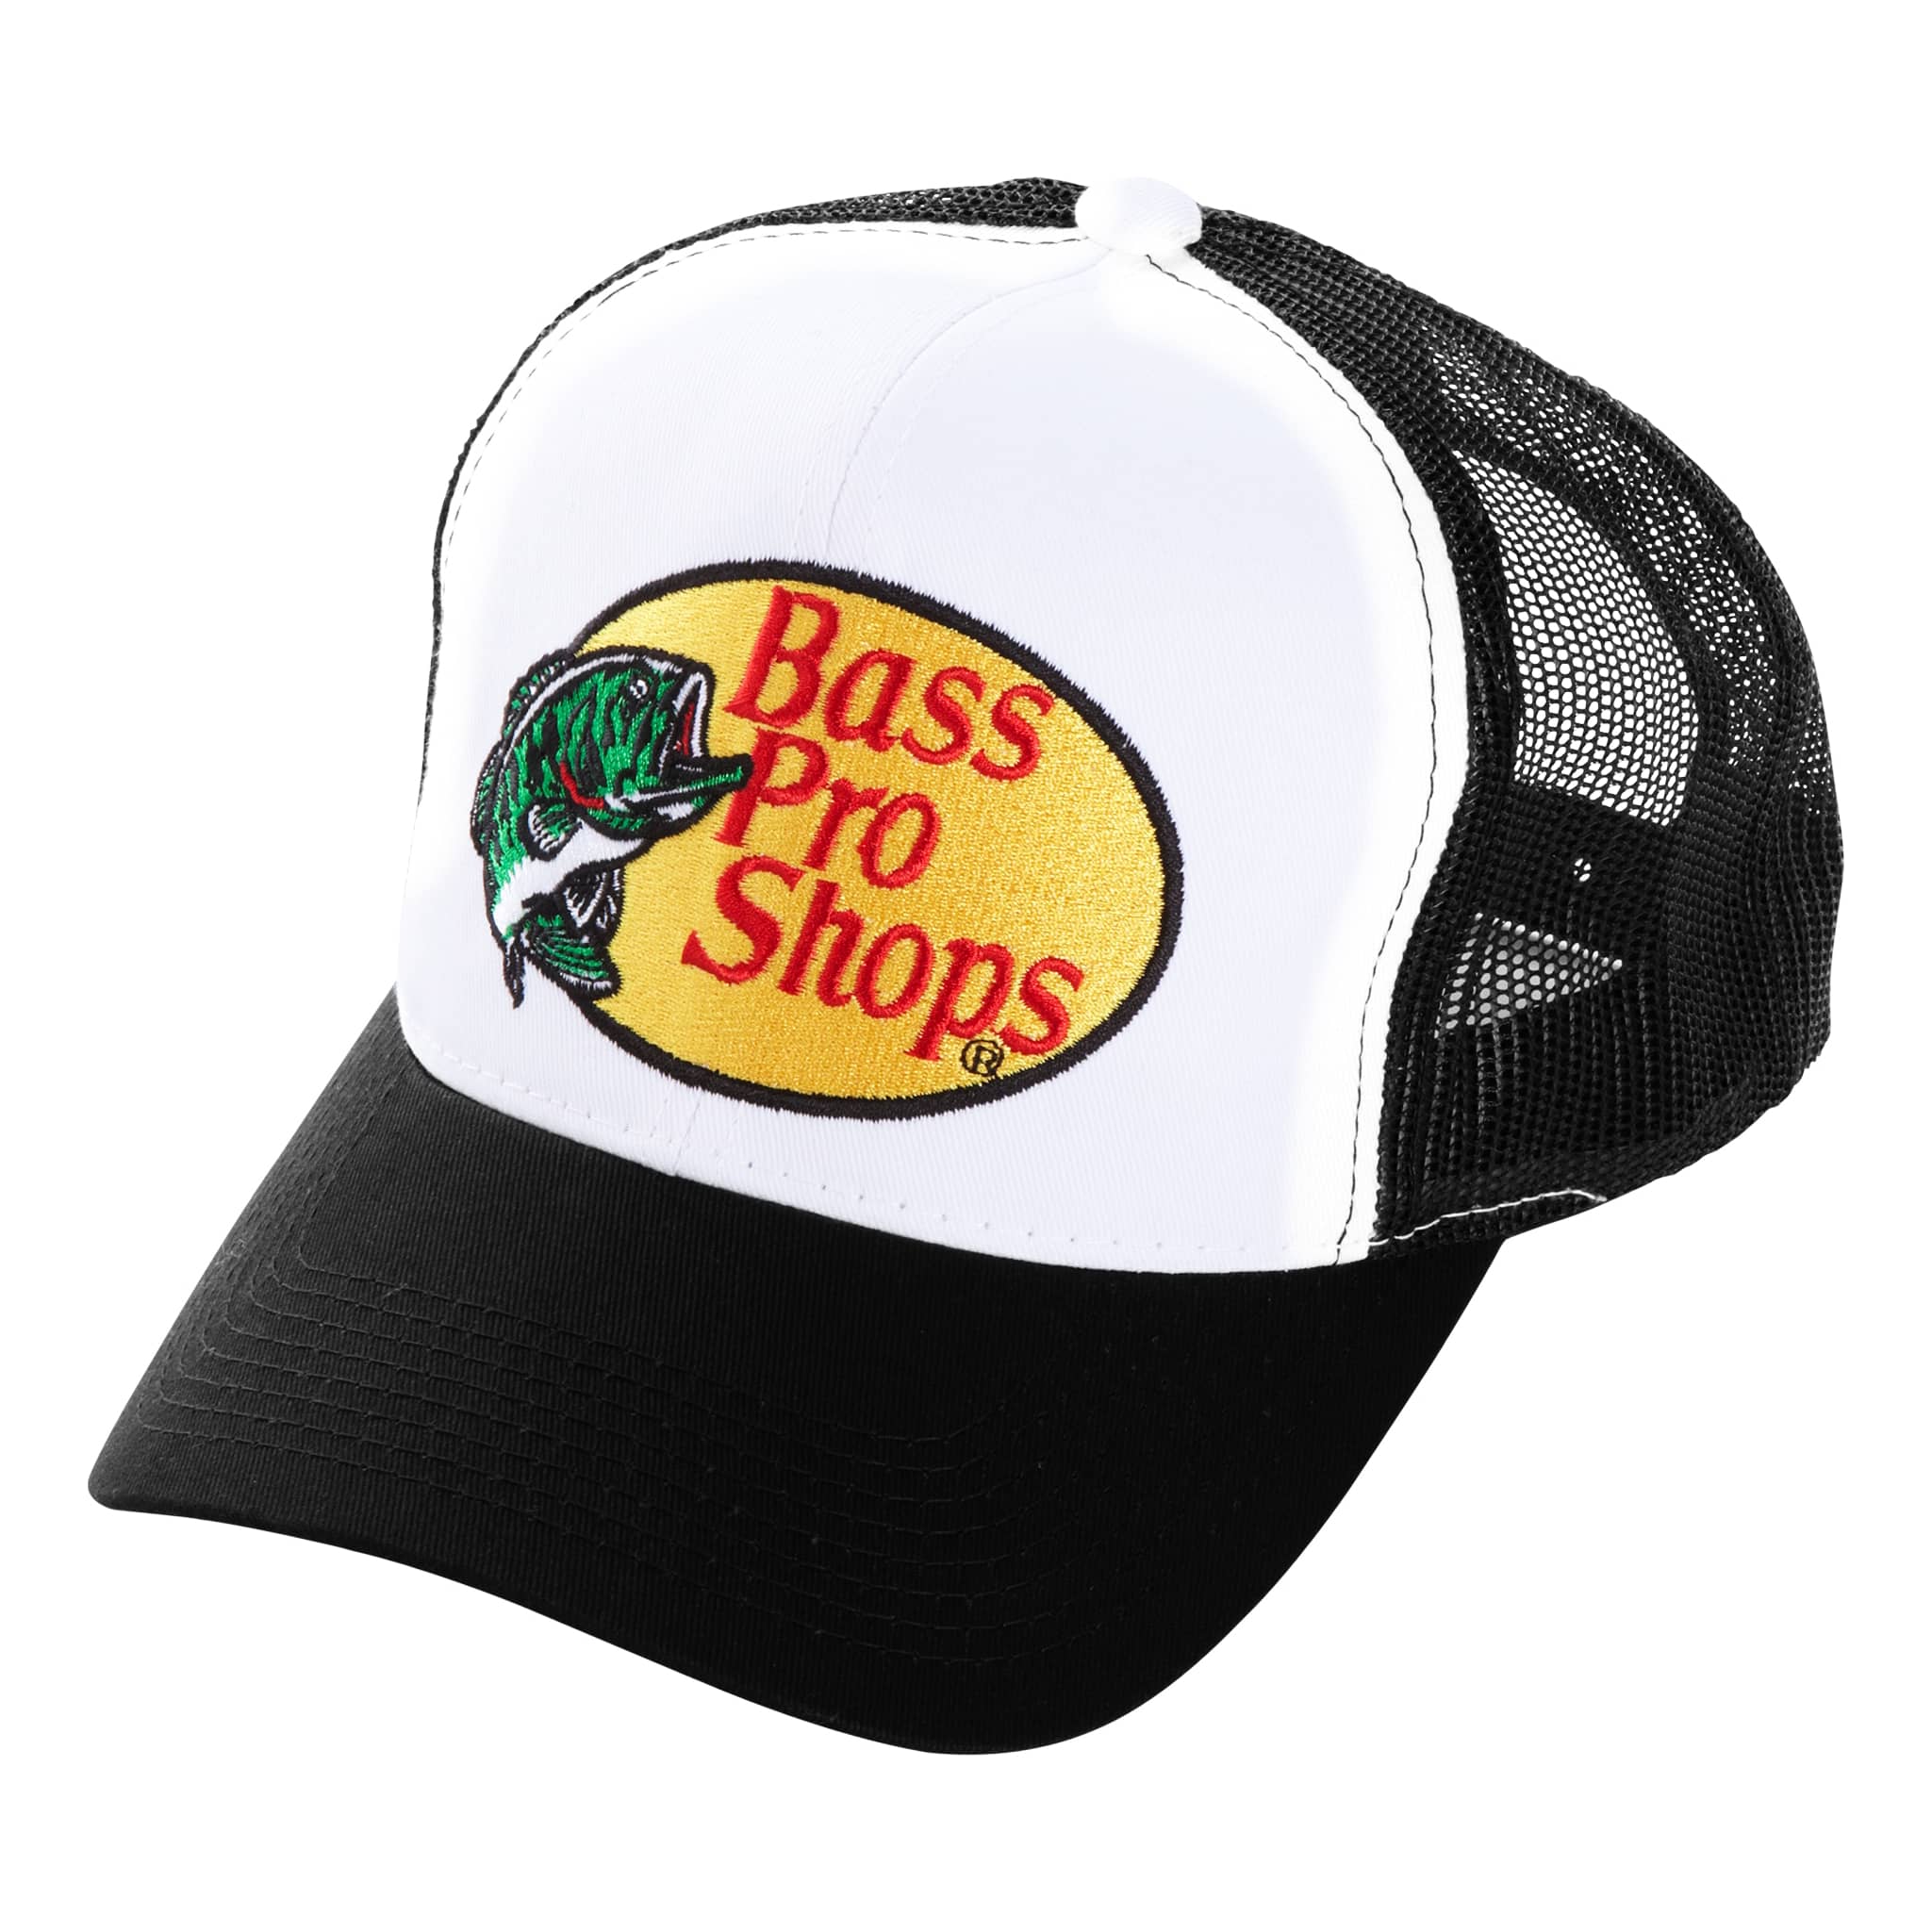 Bass Pro Shops® Embroidered Logo Mesh Caps - Black